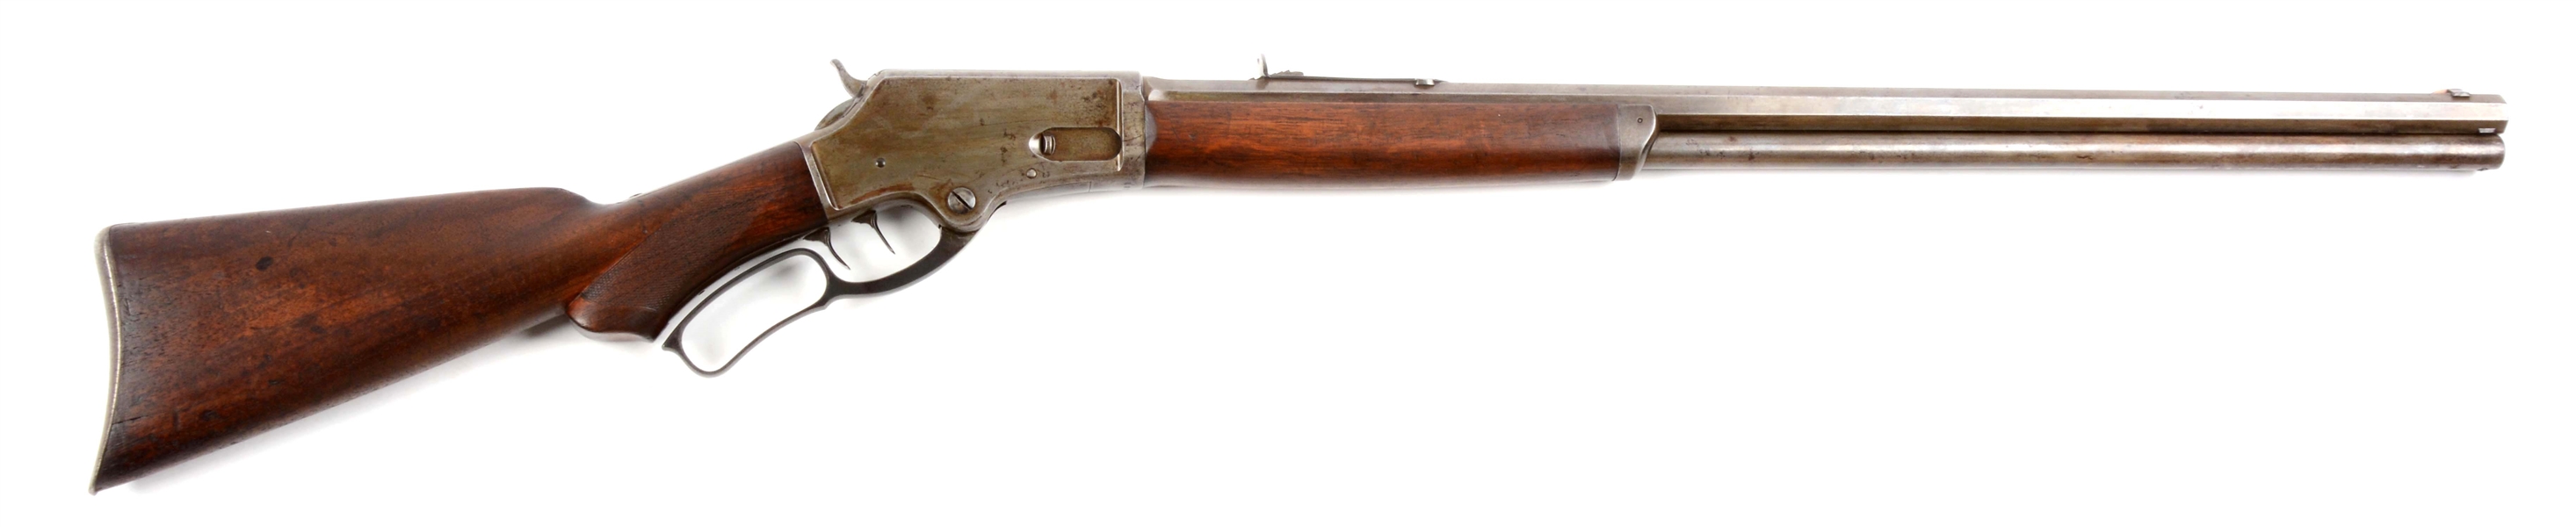 (A) MARLIN 1881 DELUXE RIFLE.